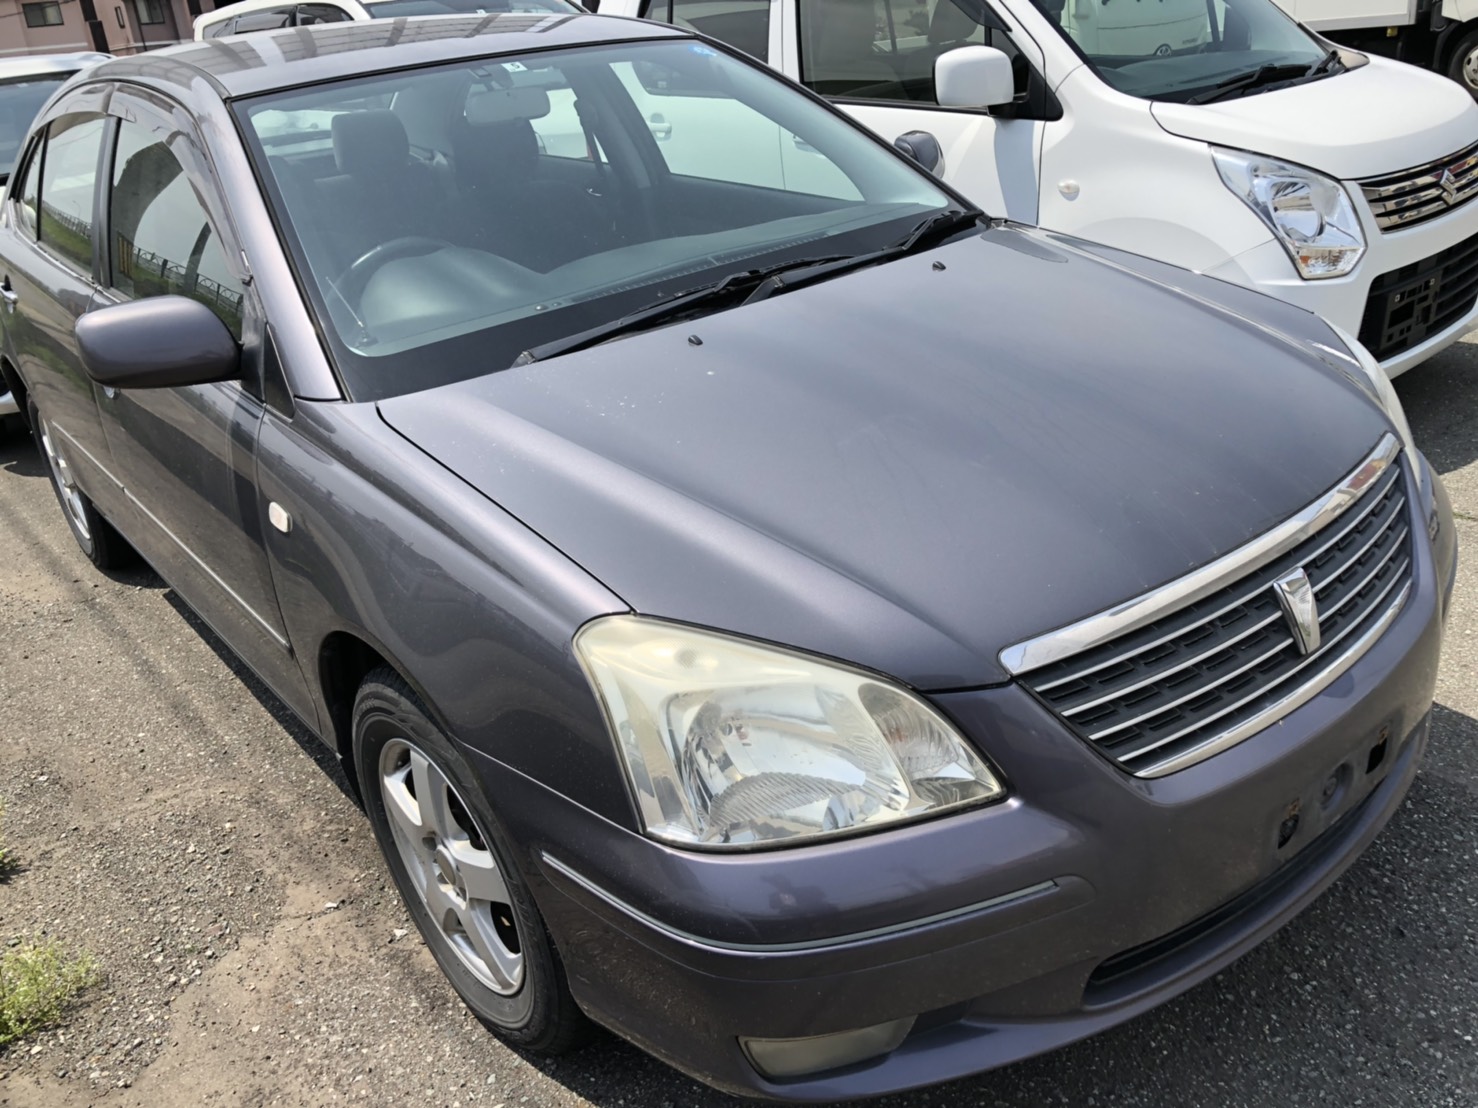 front of car ZZT240 - 2003 Toyota PREMIO A18 G PACKAGE LTD - GREY